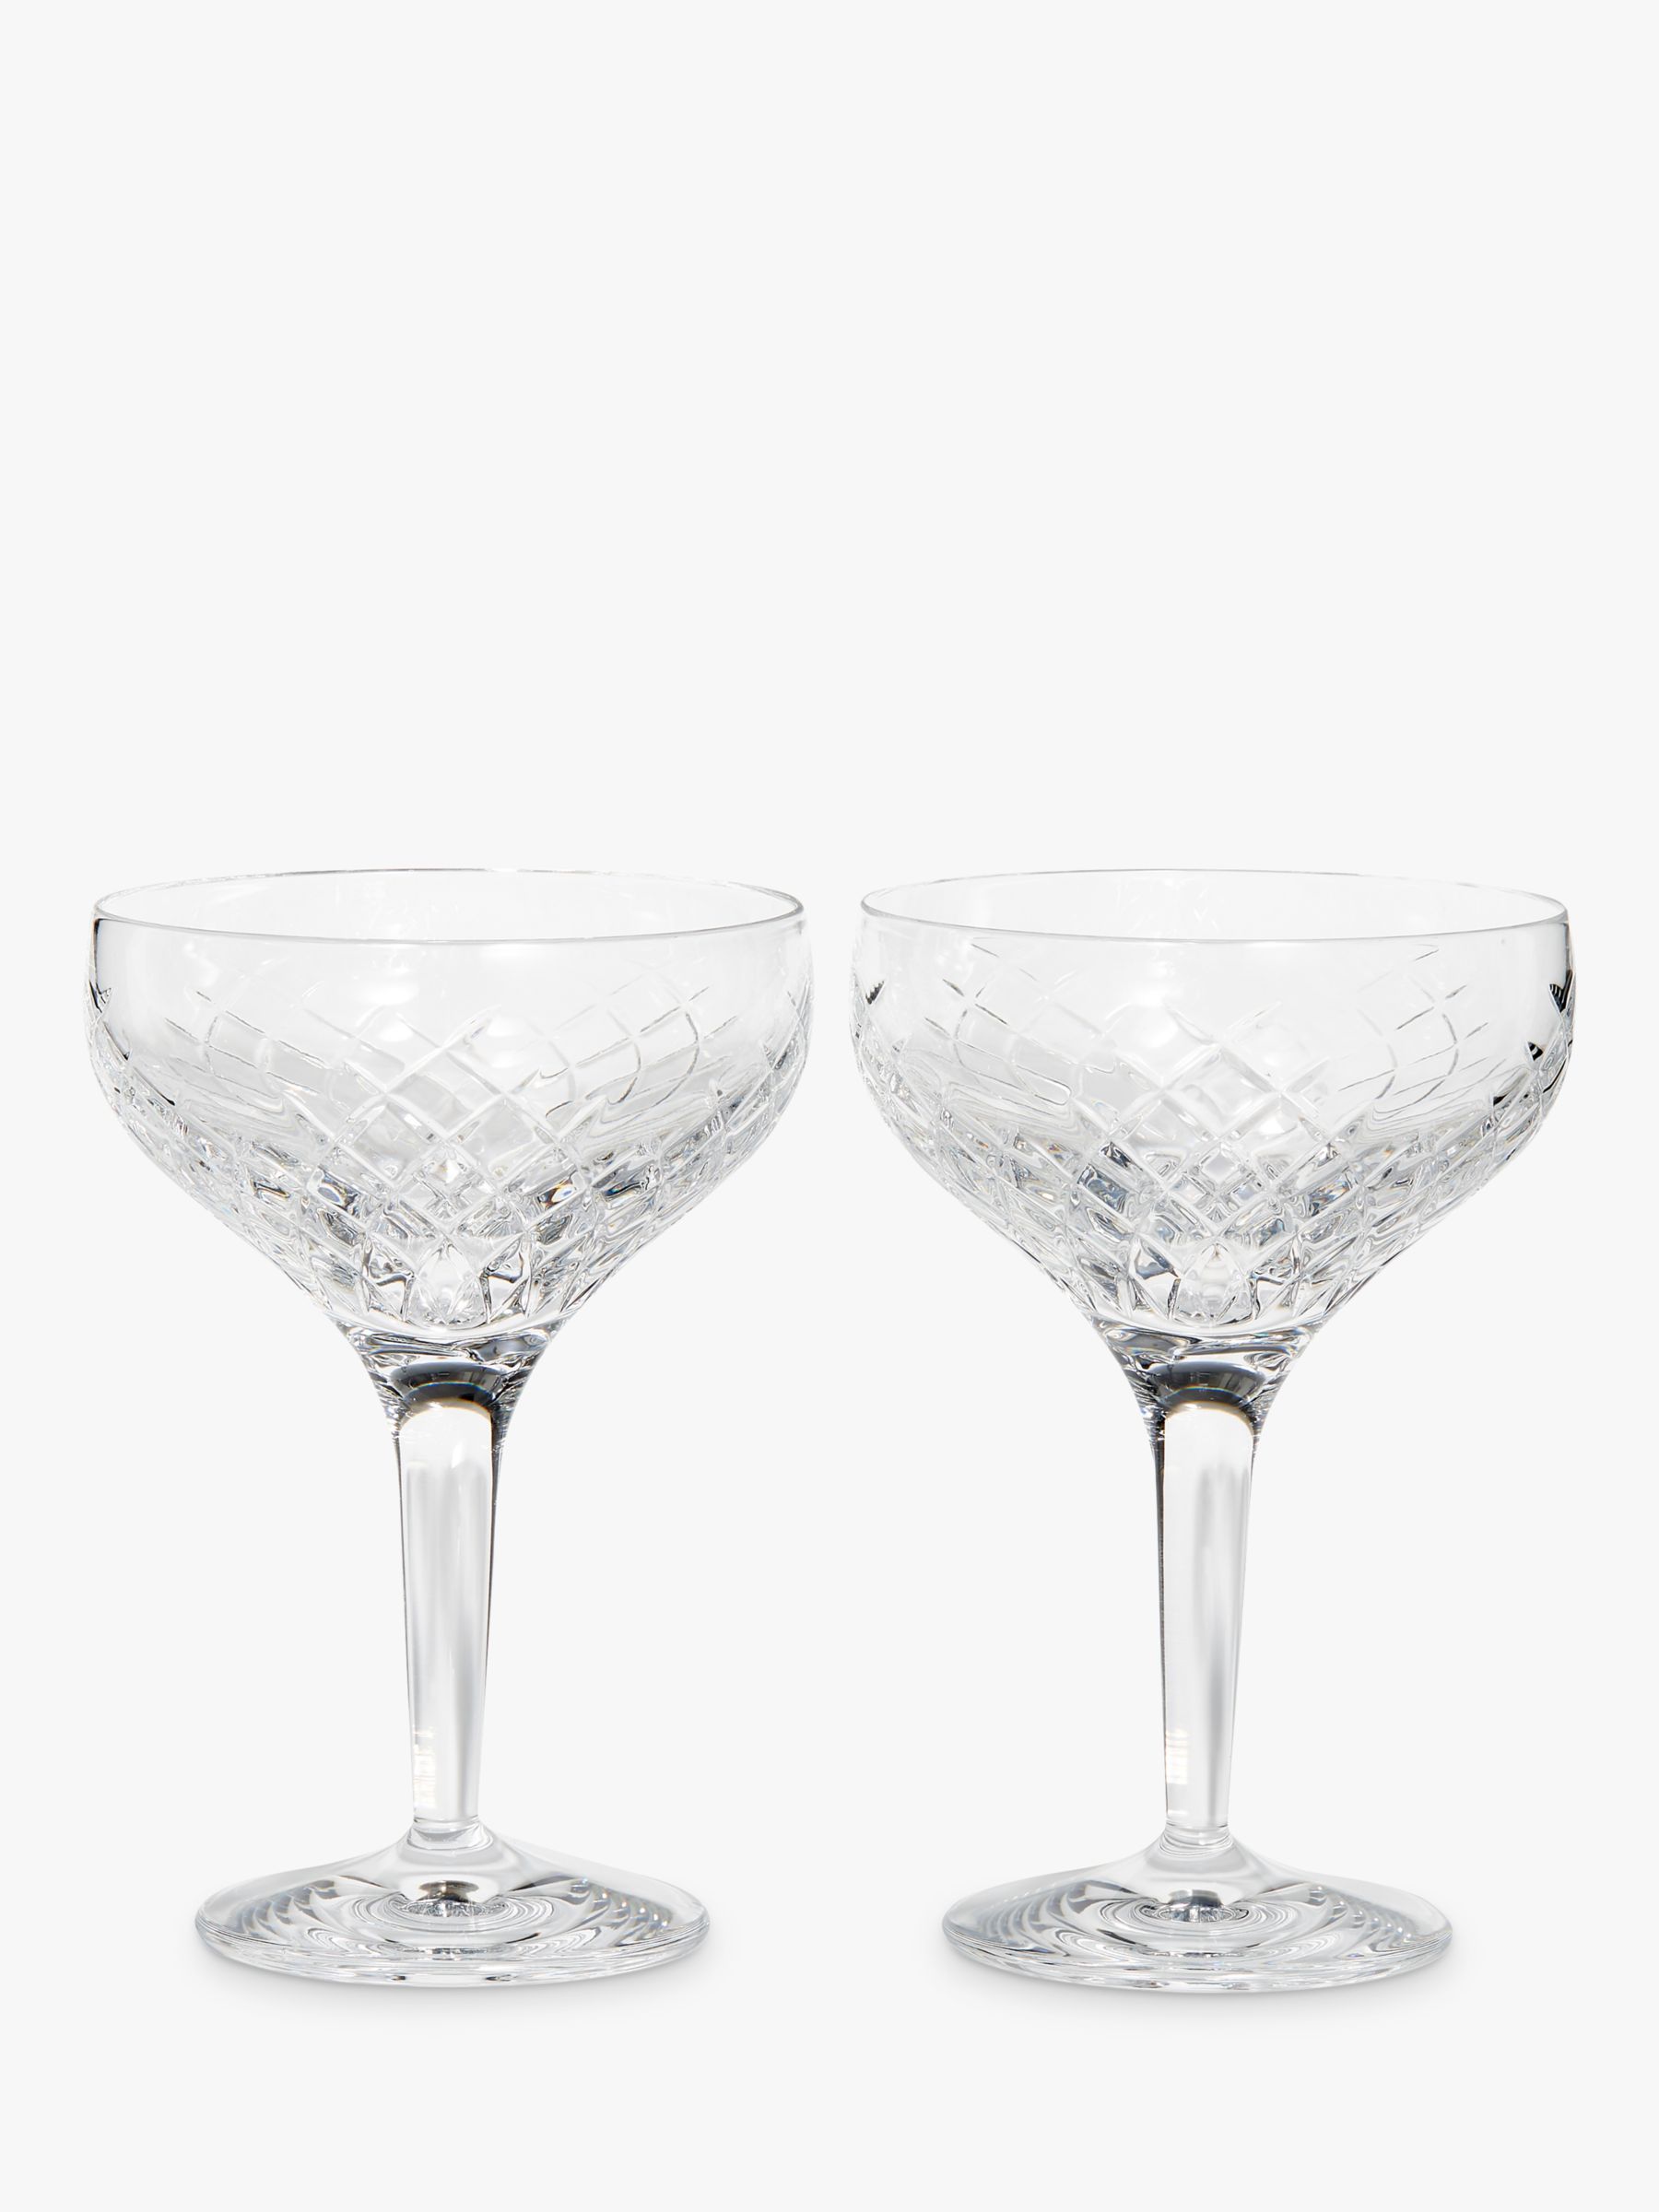 BuySoho Home Barwell Crystal Cut Champagne Coupe Glasses, 250ml, Set of 2 Online at johnlewis.com